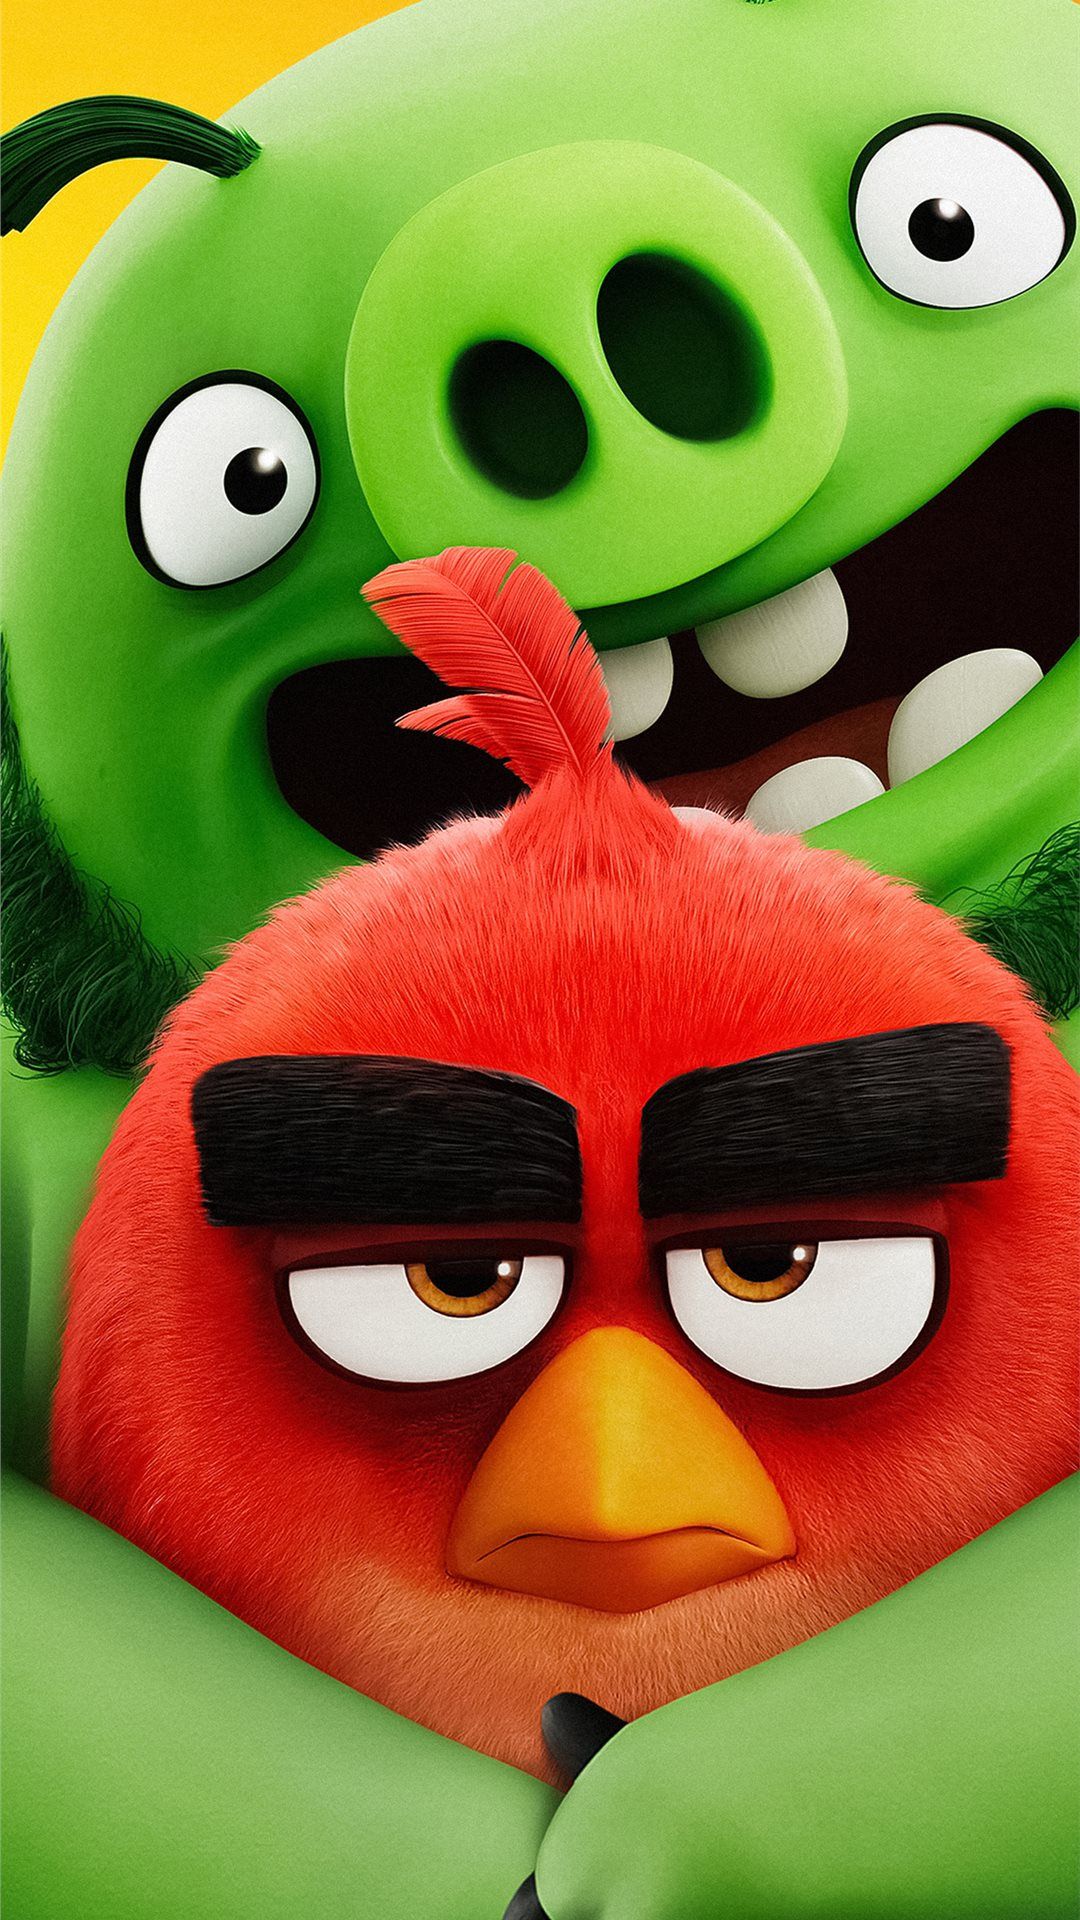 the angry birds movie 2 2019 5k new iPhone Wallpaper Free Download